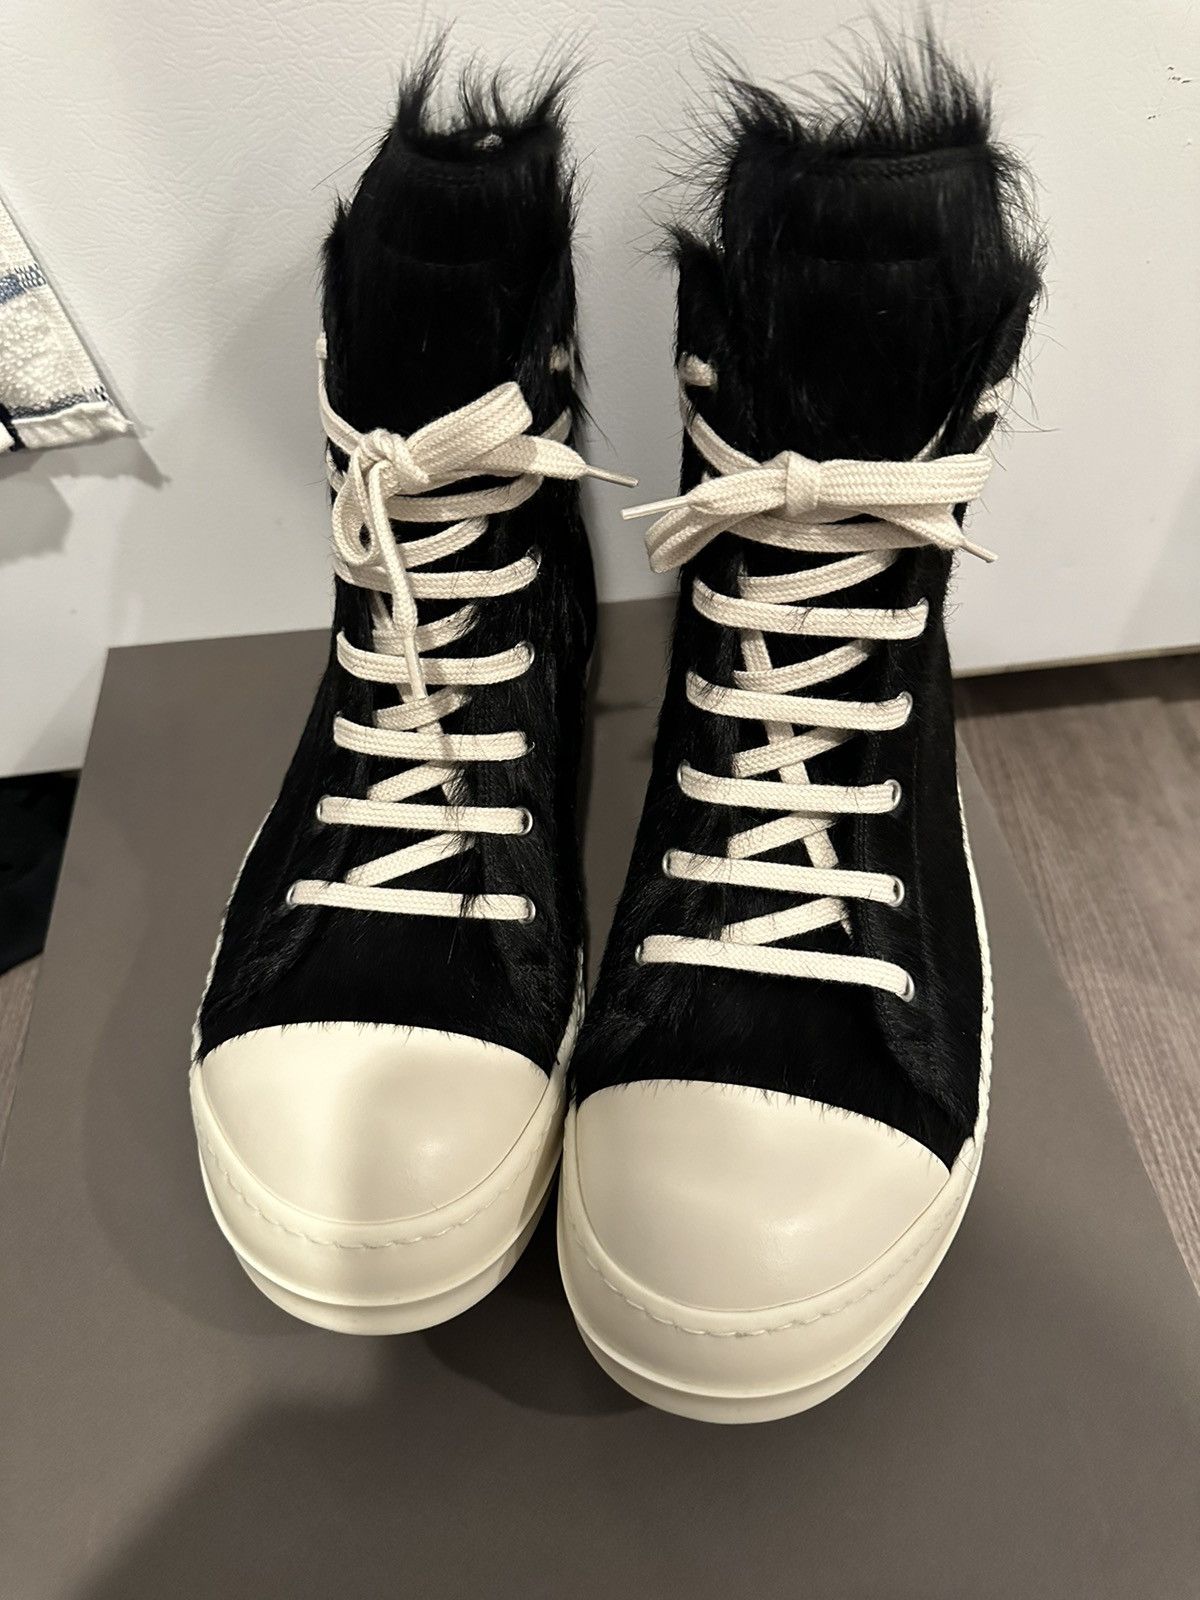 Pre-owned Rick Owens Pony Hair Ramones High Black Milk Size 44 Shoes